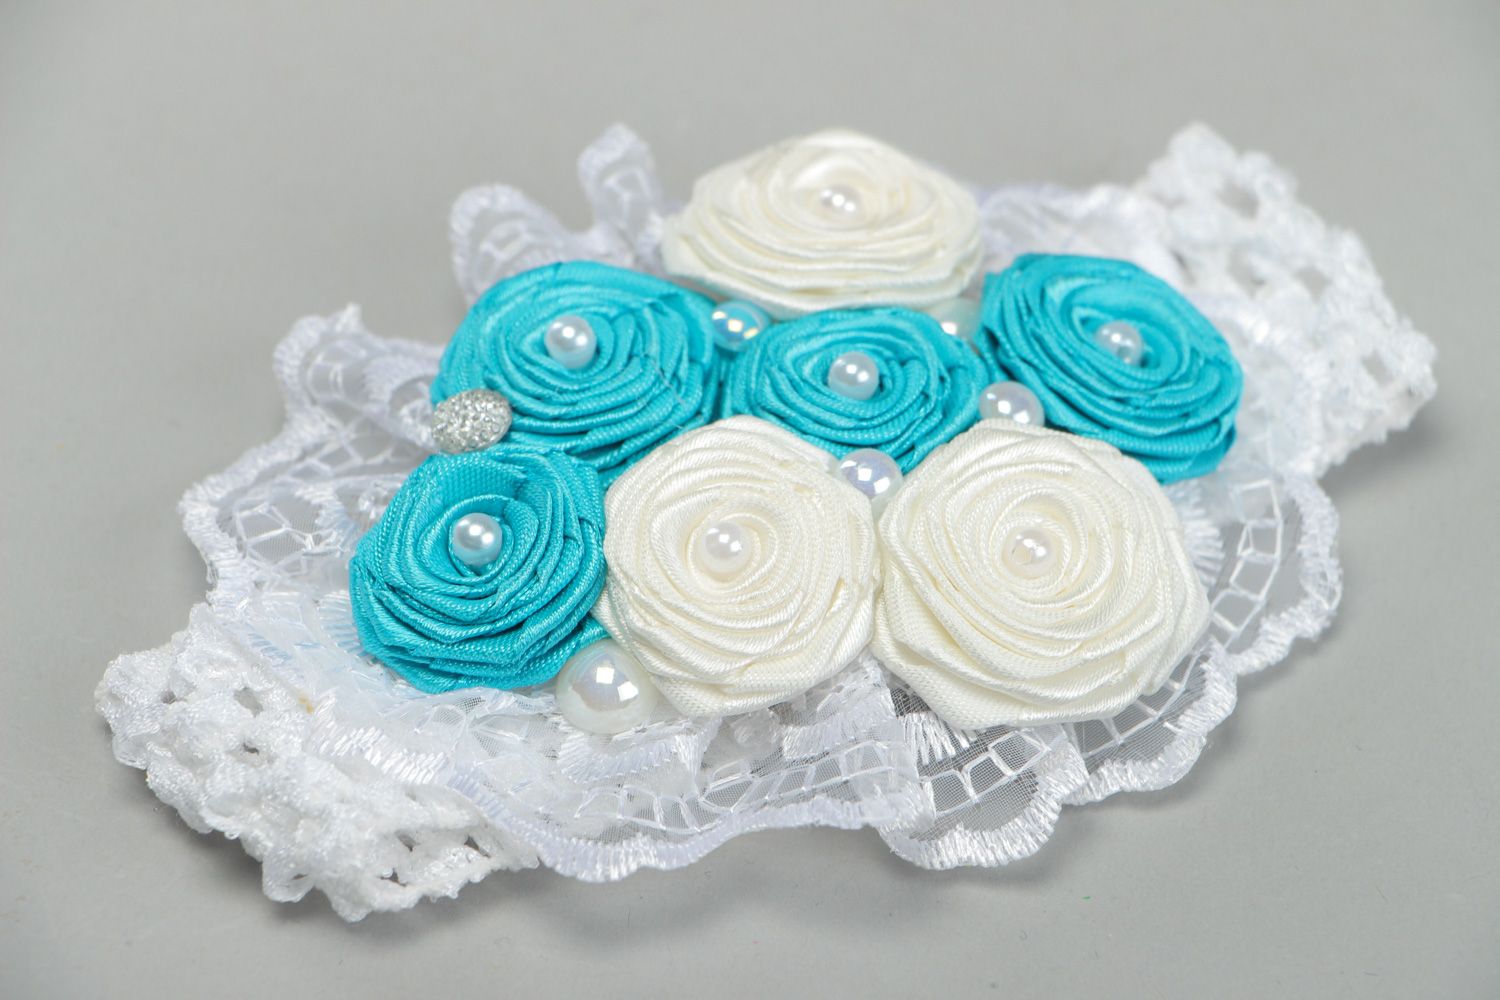 Stylish handmade floral headband with satin ribbons in white and blue colors photo 1